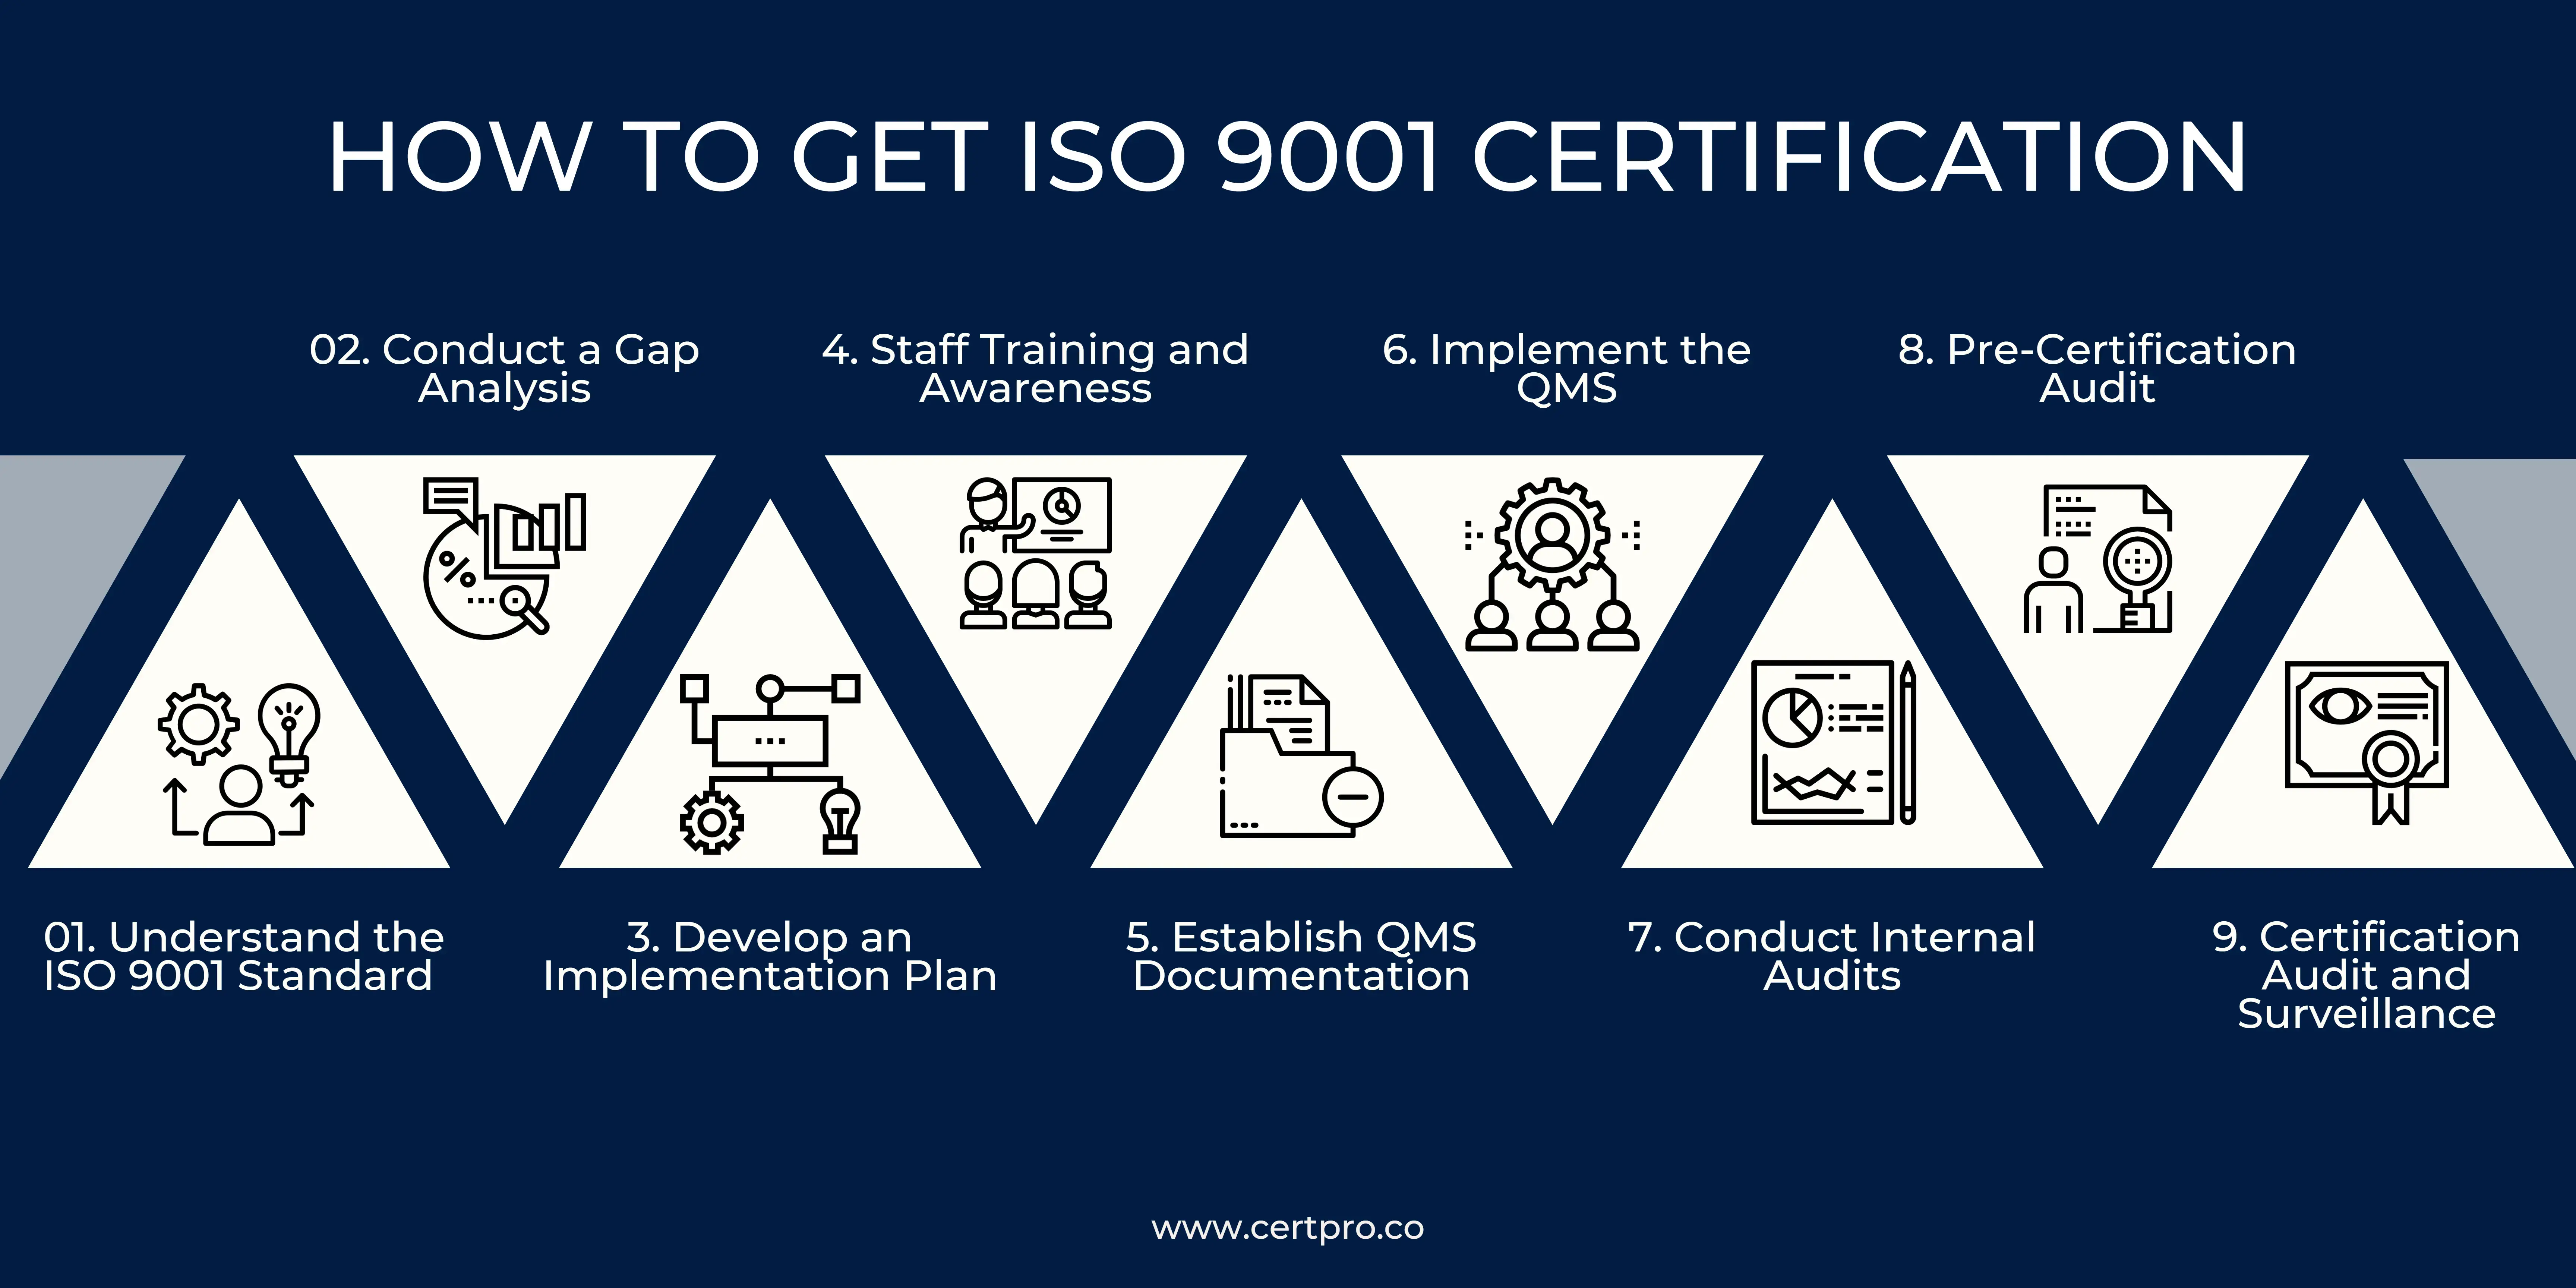 HOW TO GET ISO 9001 CERTIFICATION